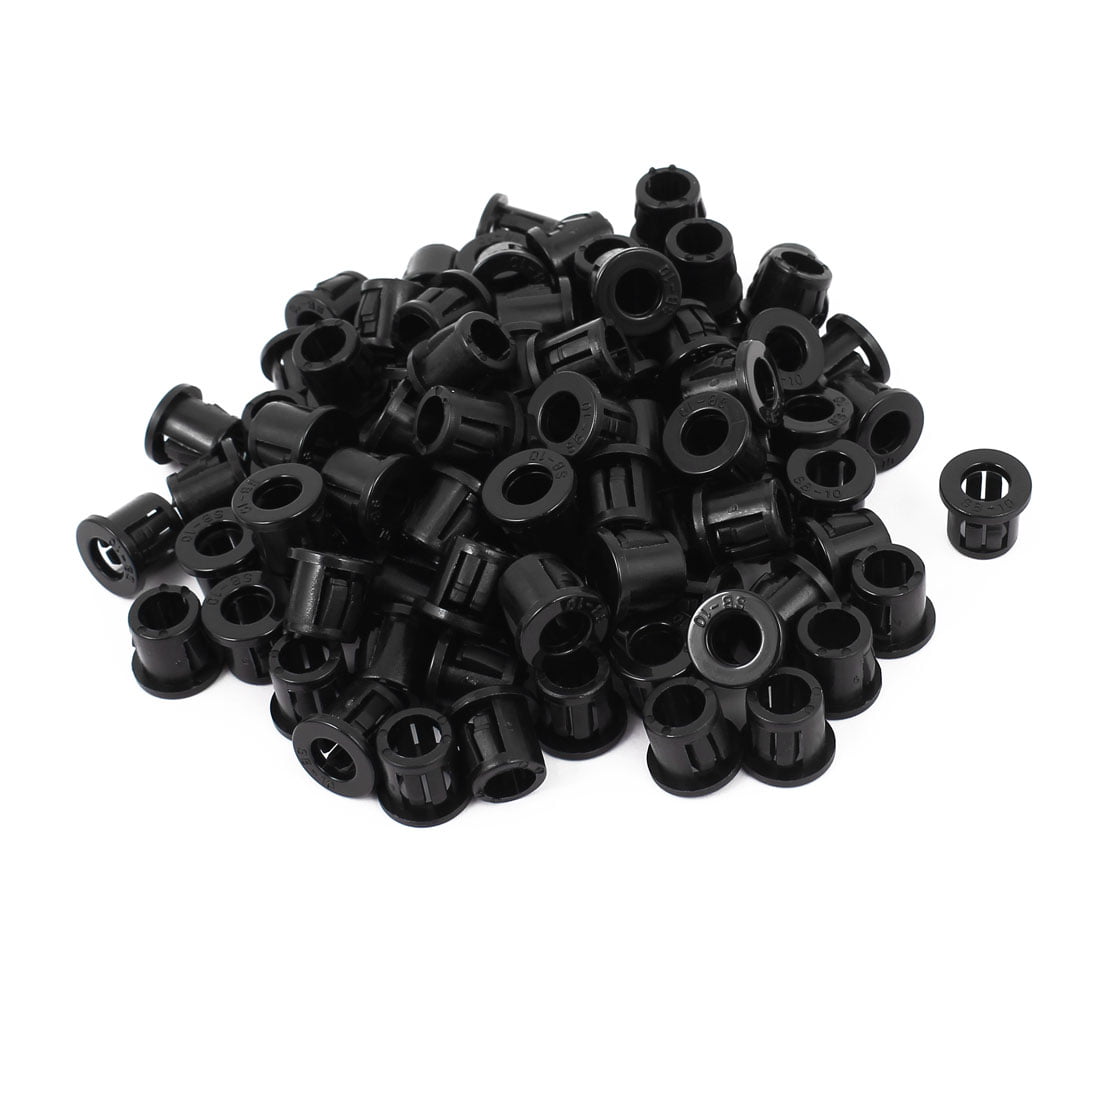 uxcell Hold Plugs,100pcs 8mm Mounted Dia Snap in Cable Hose Bushing Grommet Protector Black